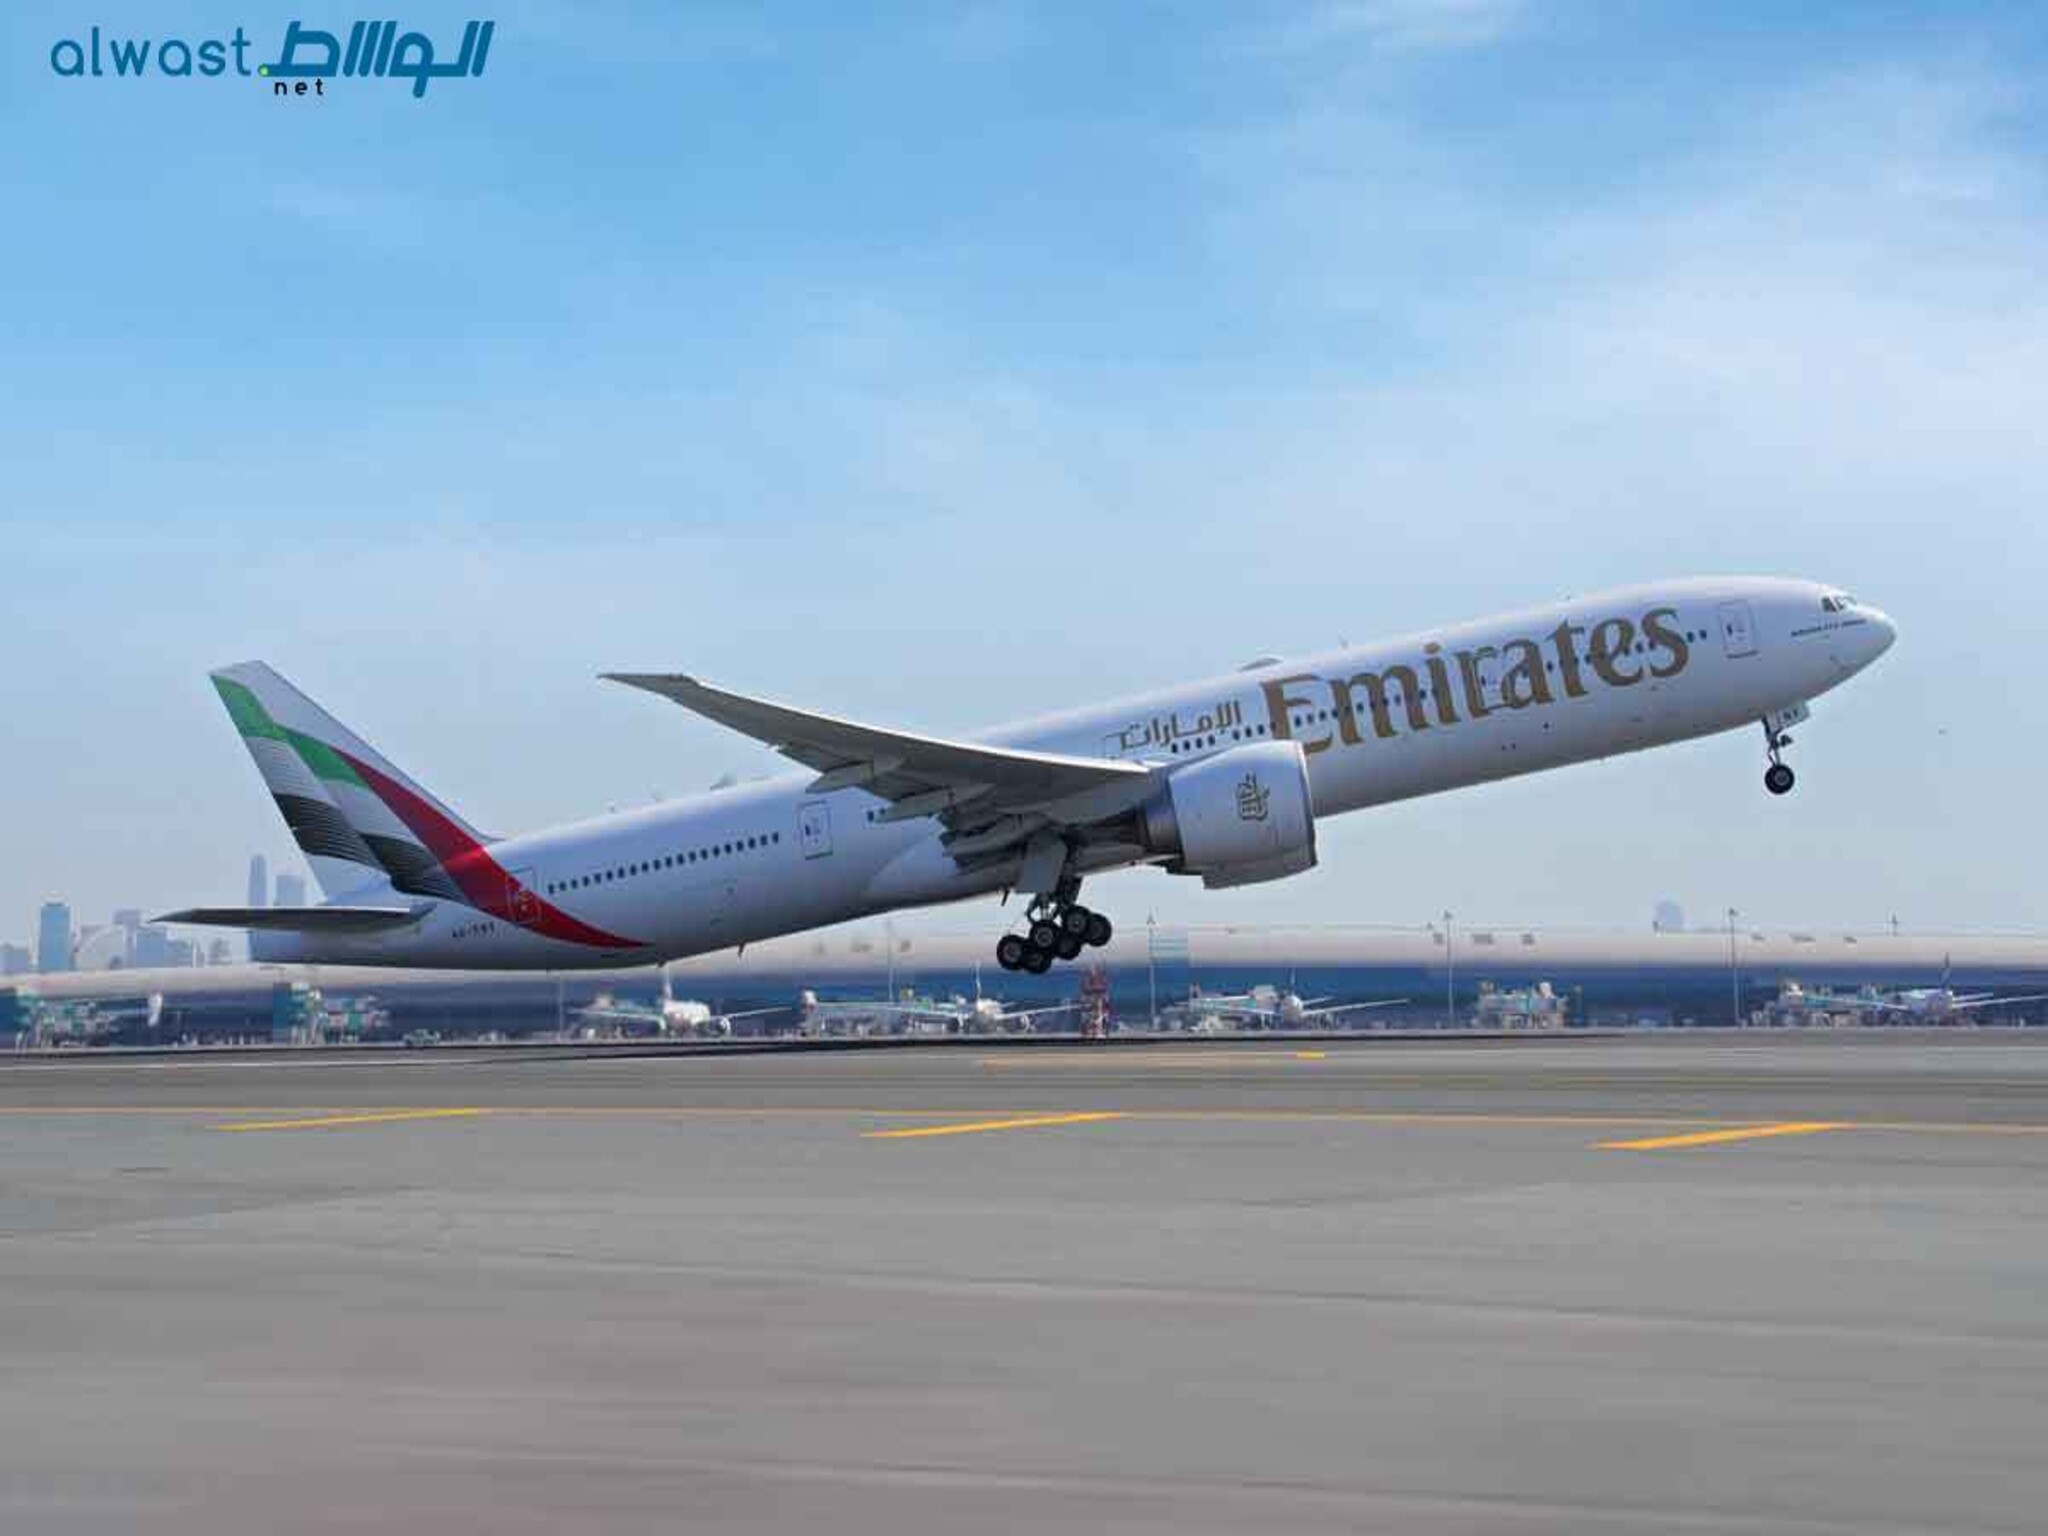 Emirates: 143 global destinations spanning 76 countries from Dubai